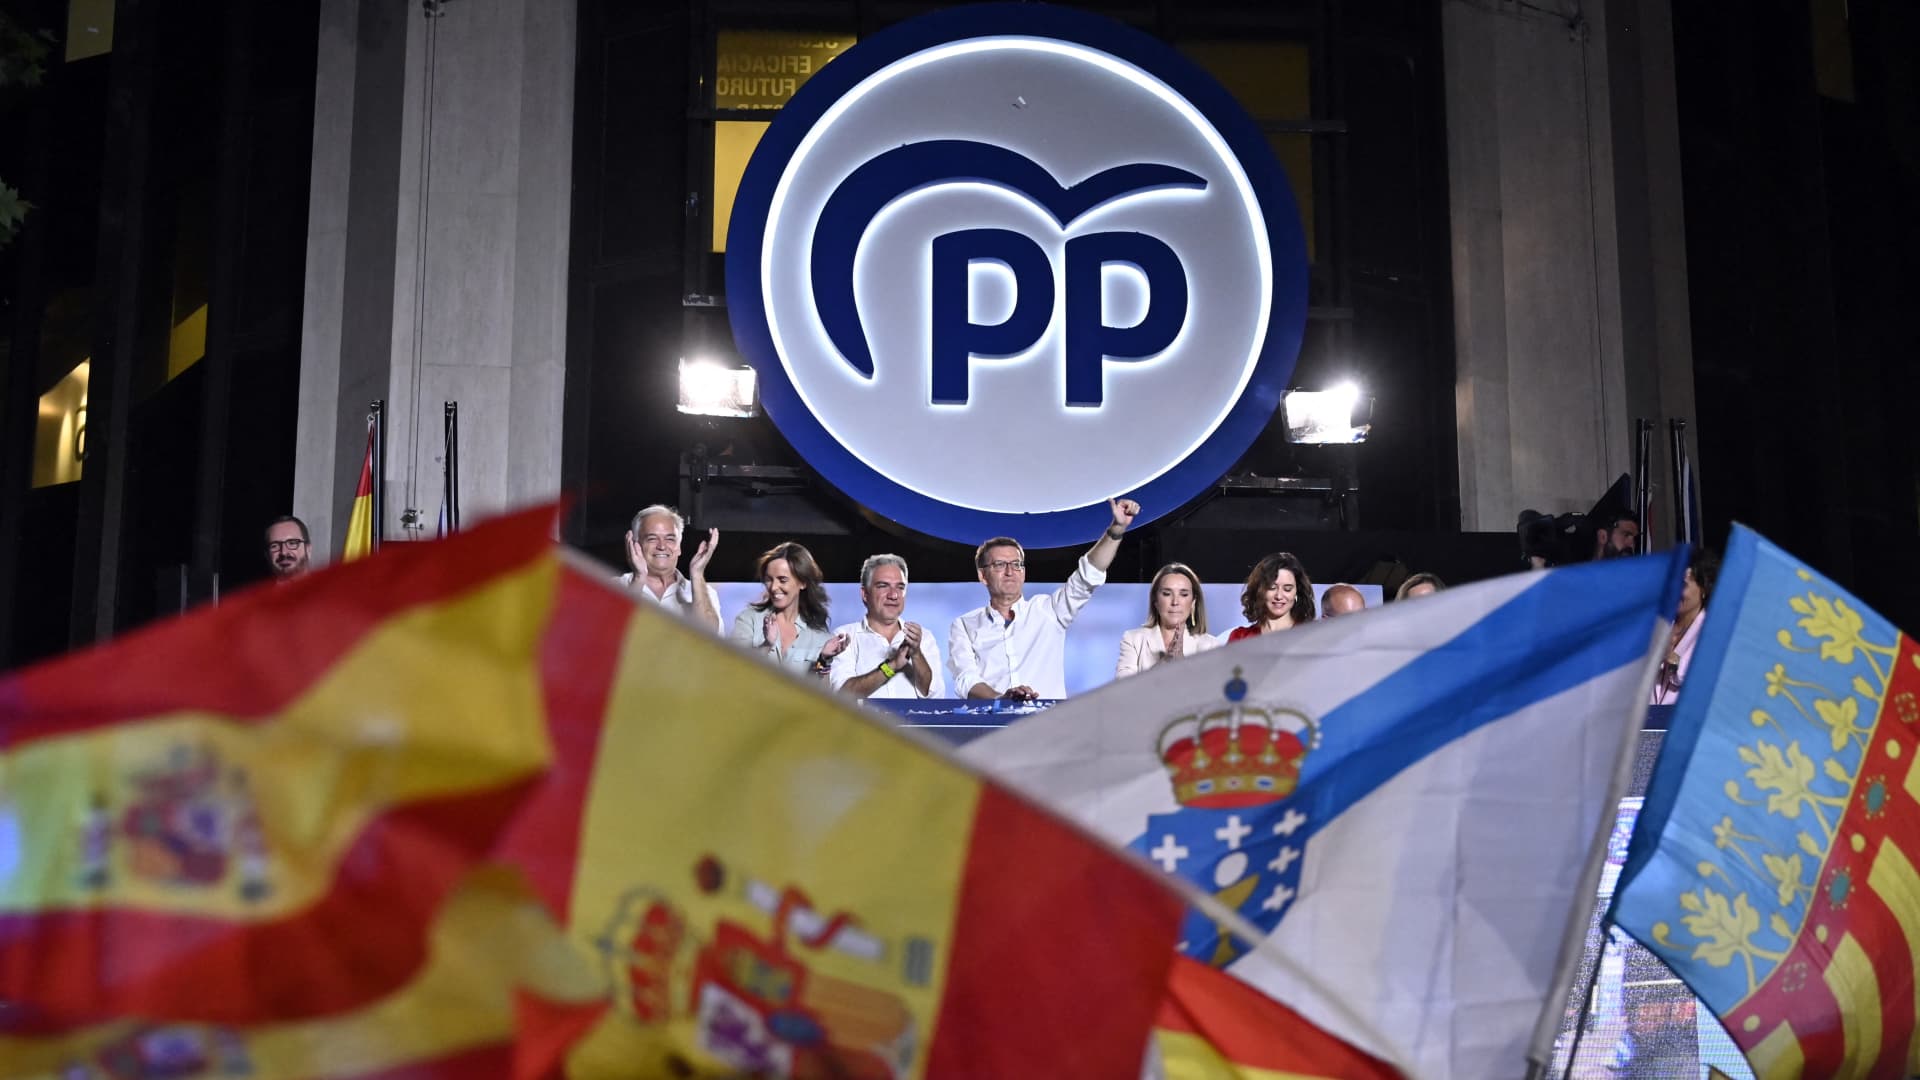 Spain’s People’s Party (PP) Come Out On Top In European Union’s Election